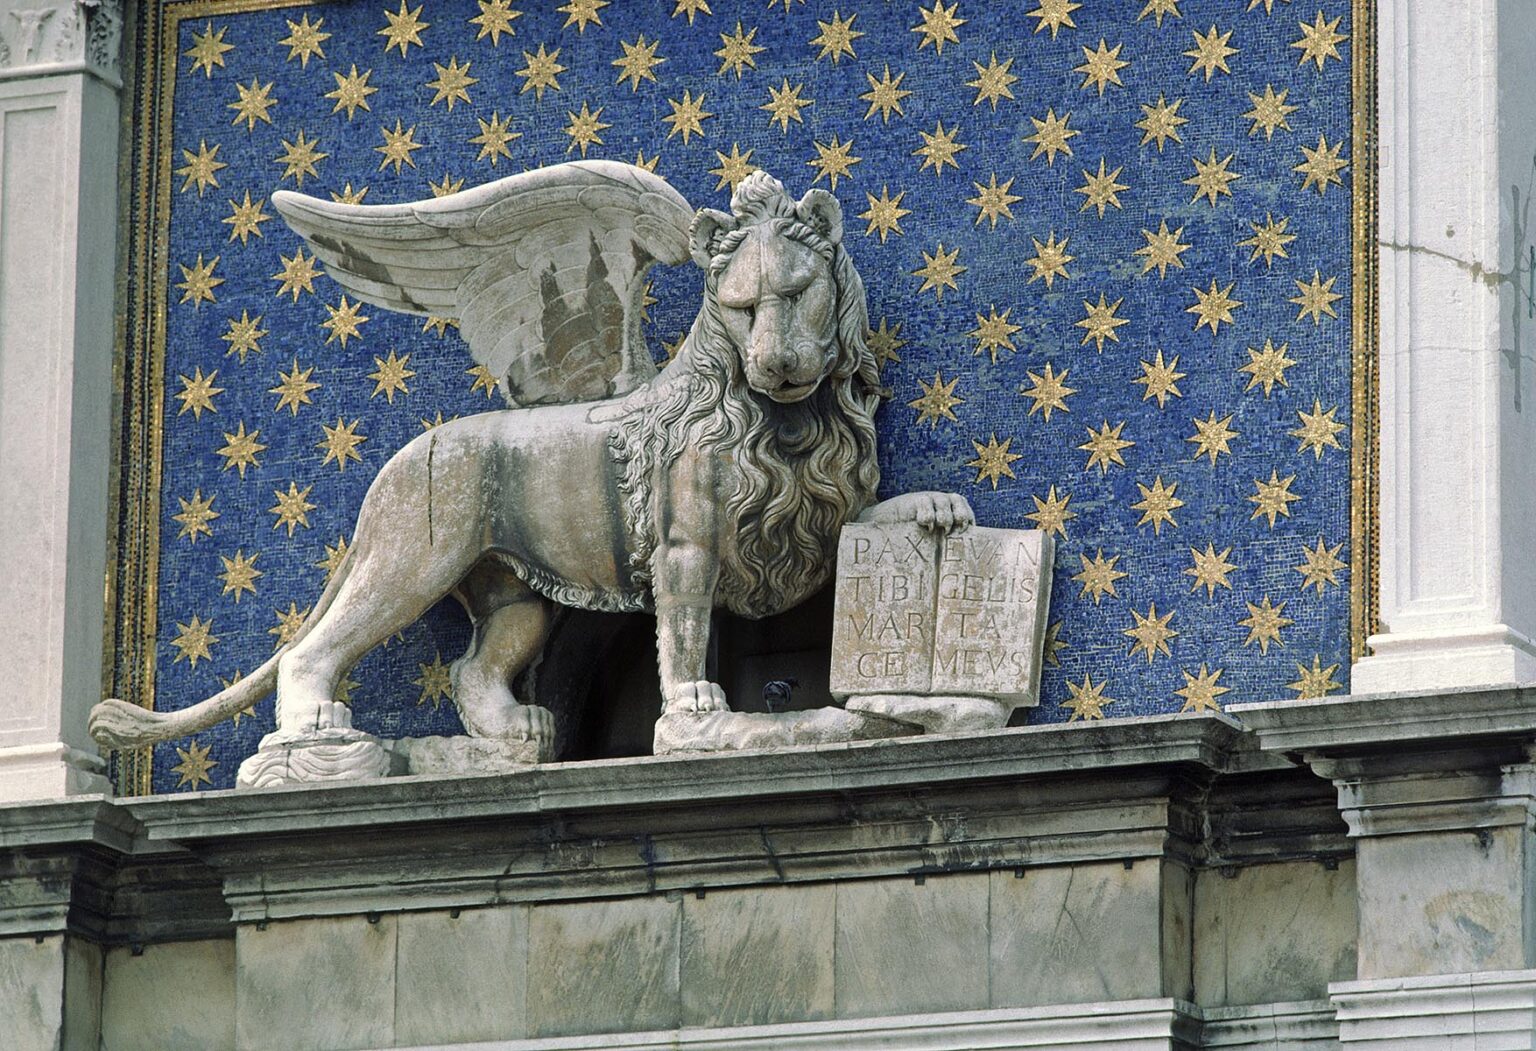 A stone LION WITH WINGS sits above the Astronomical Clock in the main plaza of VENICE - ITALY